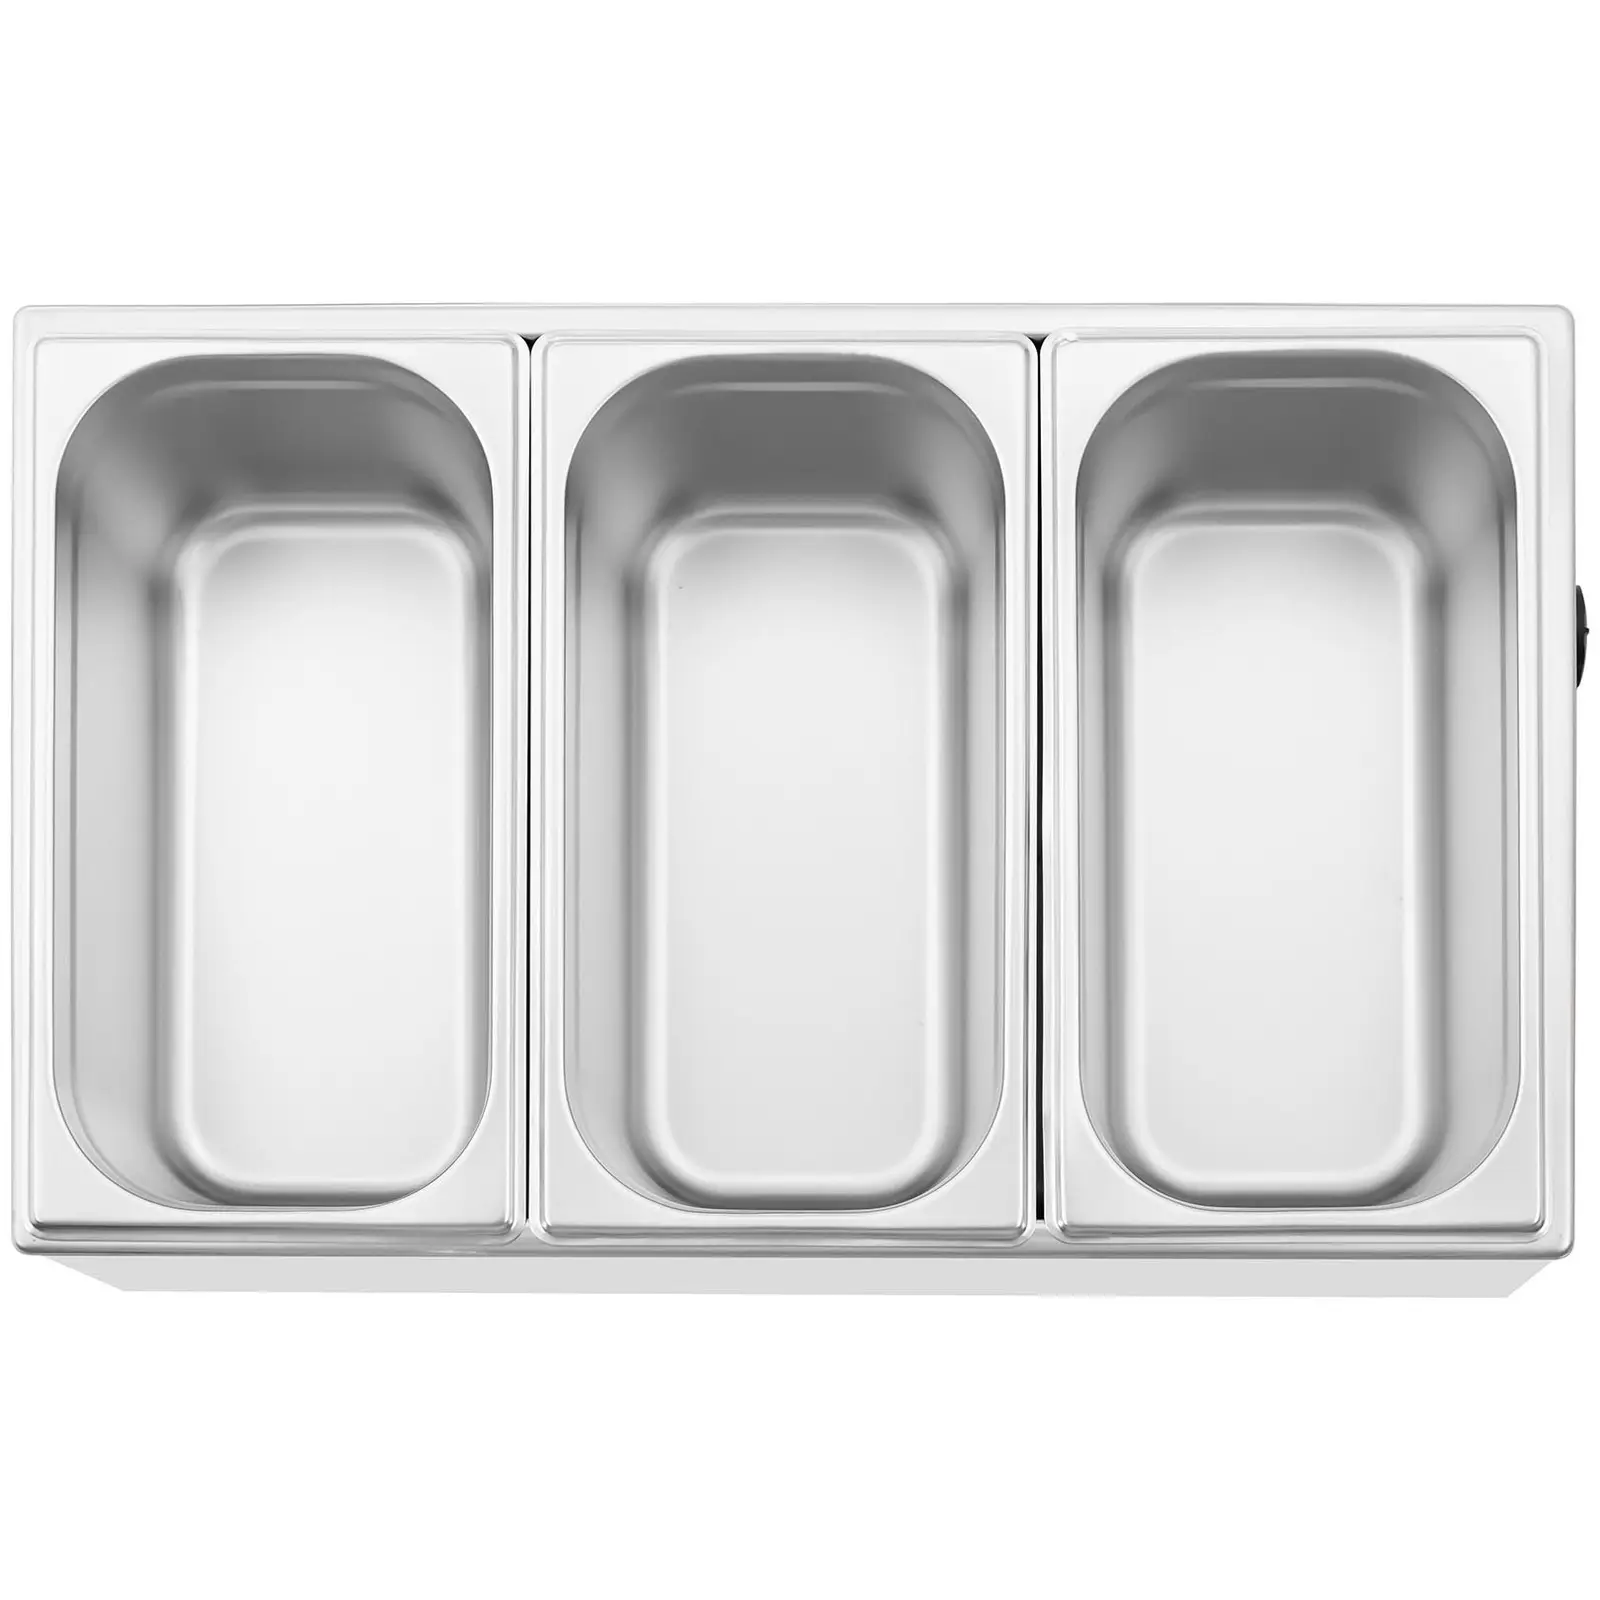 Bain-marie professionnel - 640 W - 3 x GN 1/3 - Royal Catering